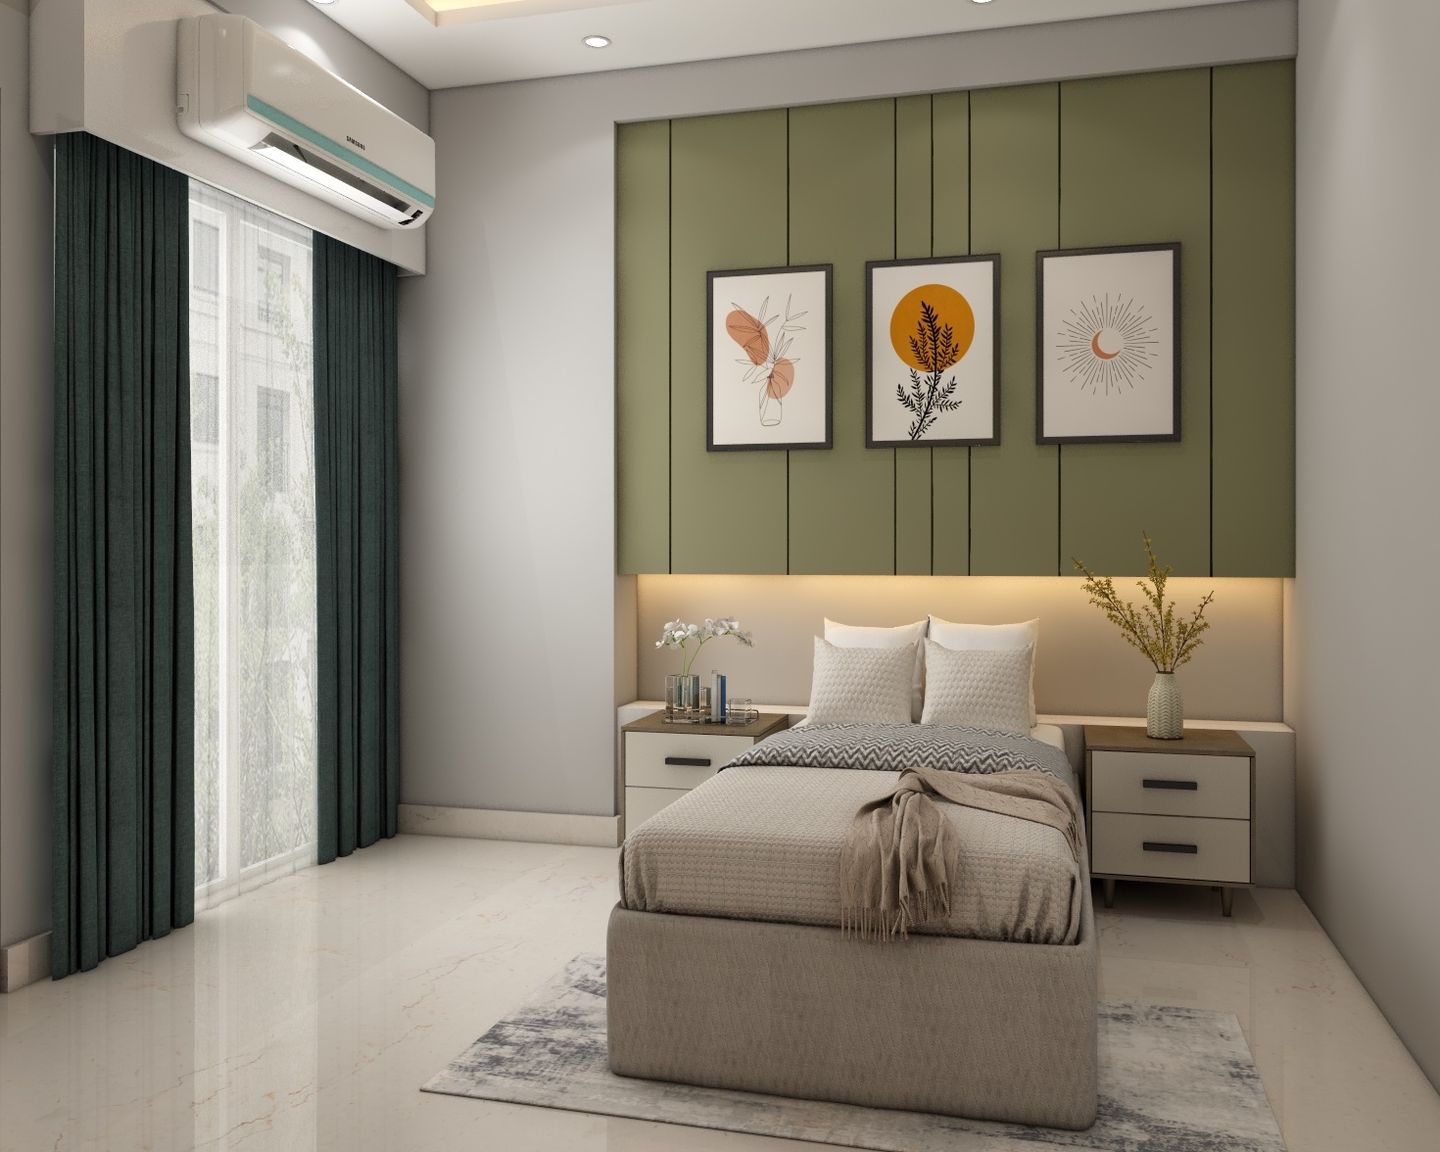 Guest Room With Green Panelling - Livspace